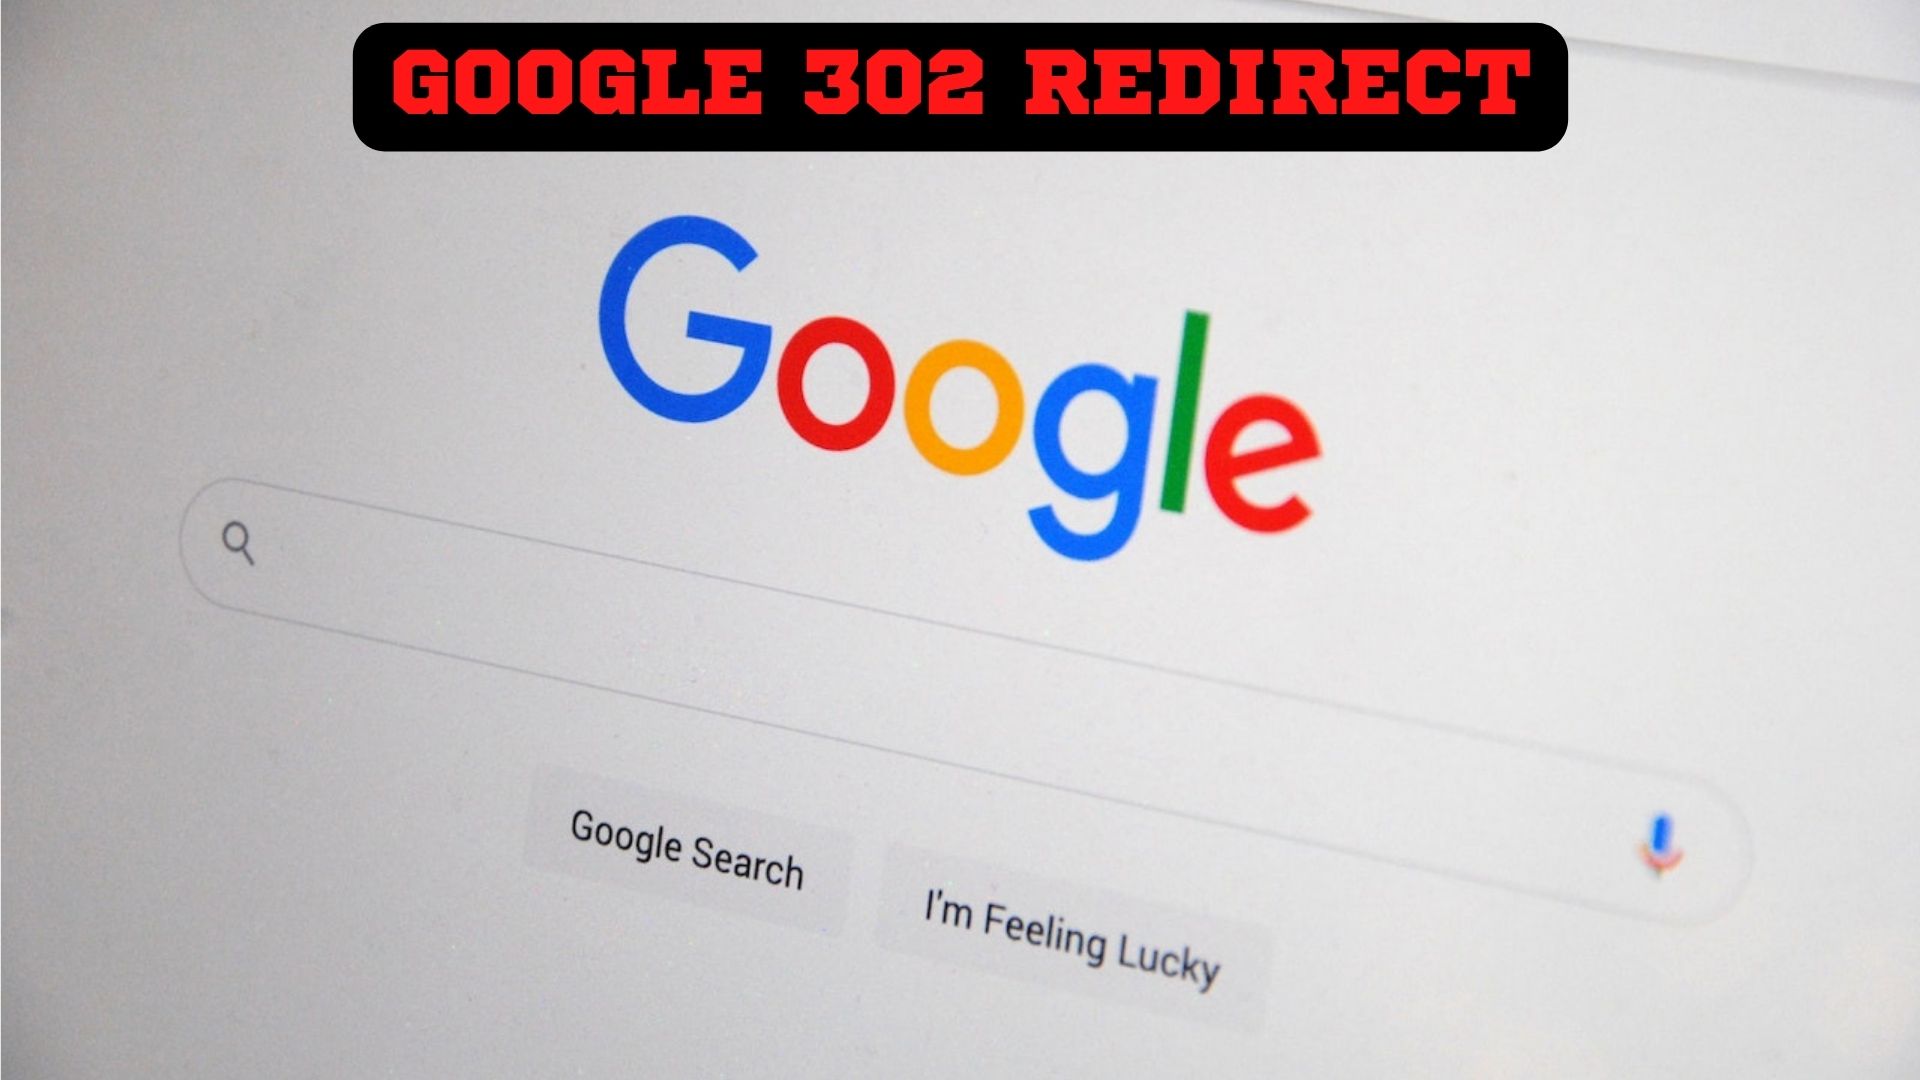 Google 302 Redirect - Ultimate Guide To Understand Them